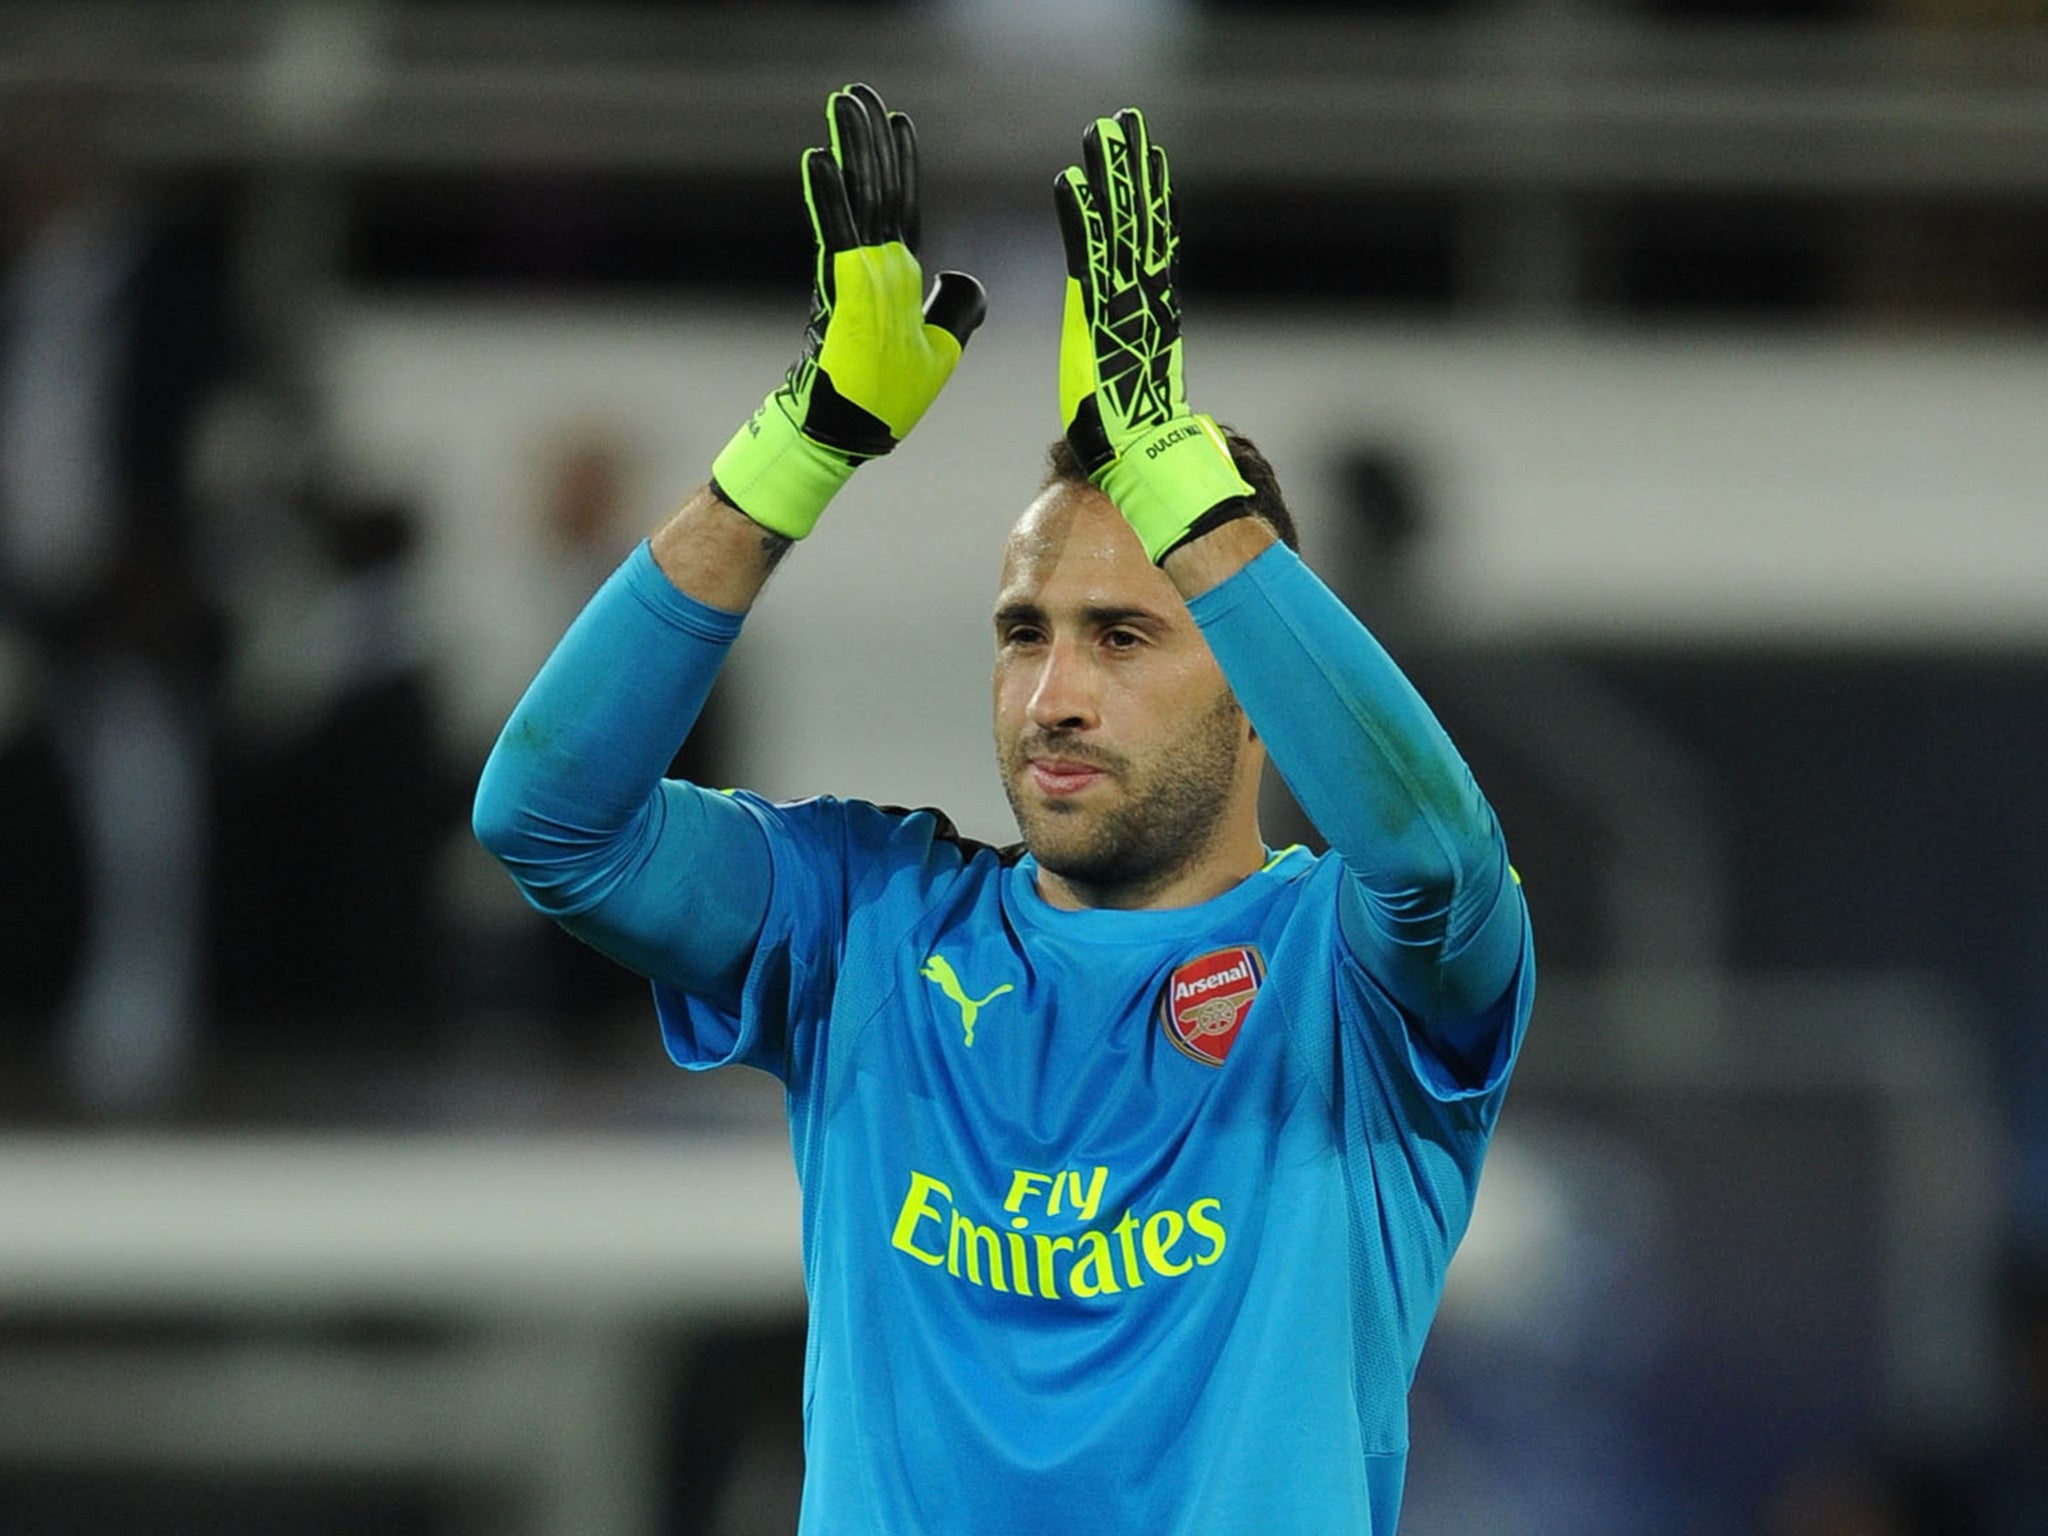 Ospina denied PSG on several occasions during the 1-1 draw